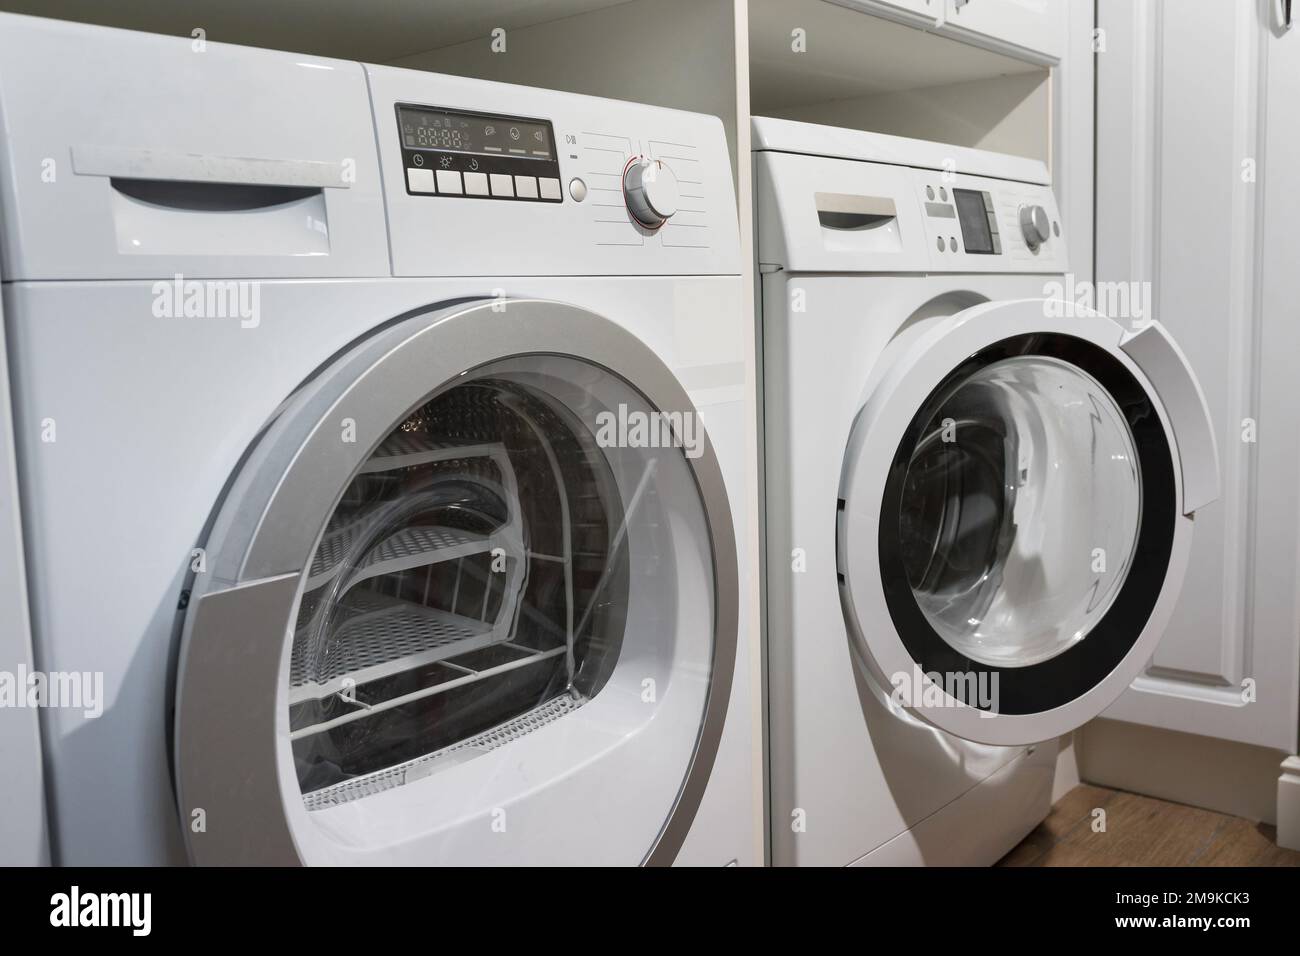 Washing machines, dryer and other domestic appliance equipment in the house Stock Photo